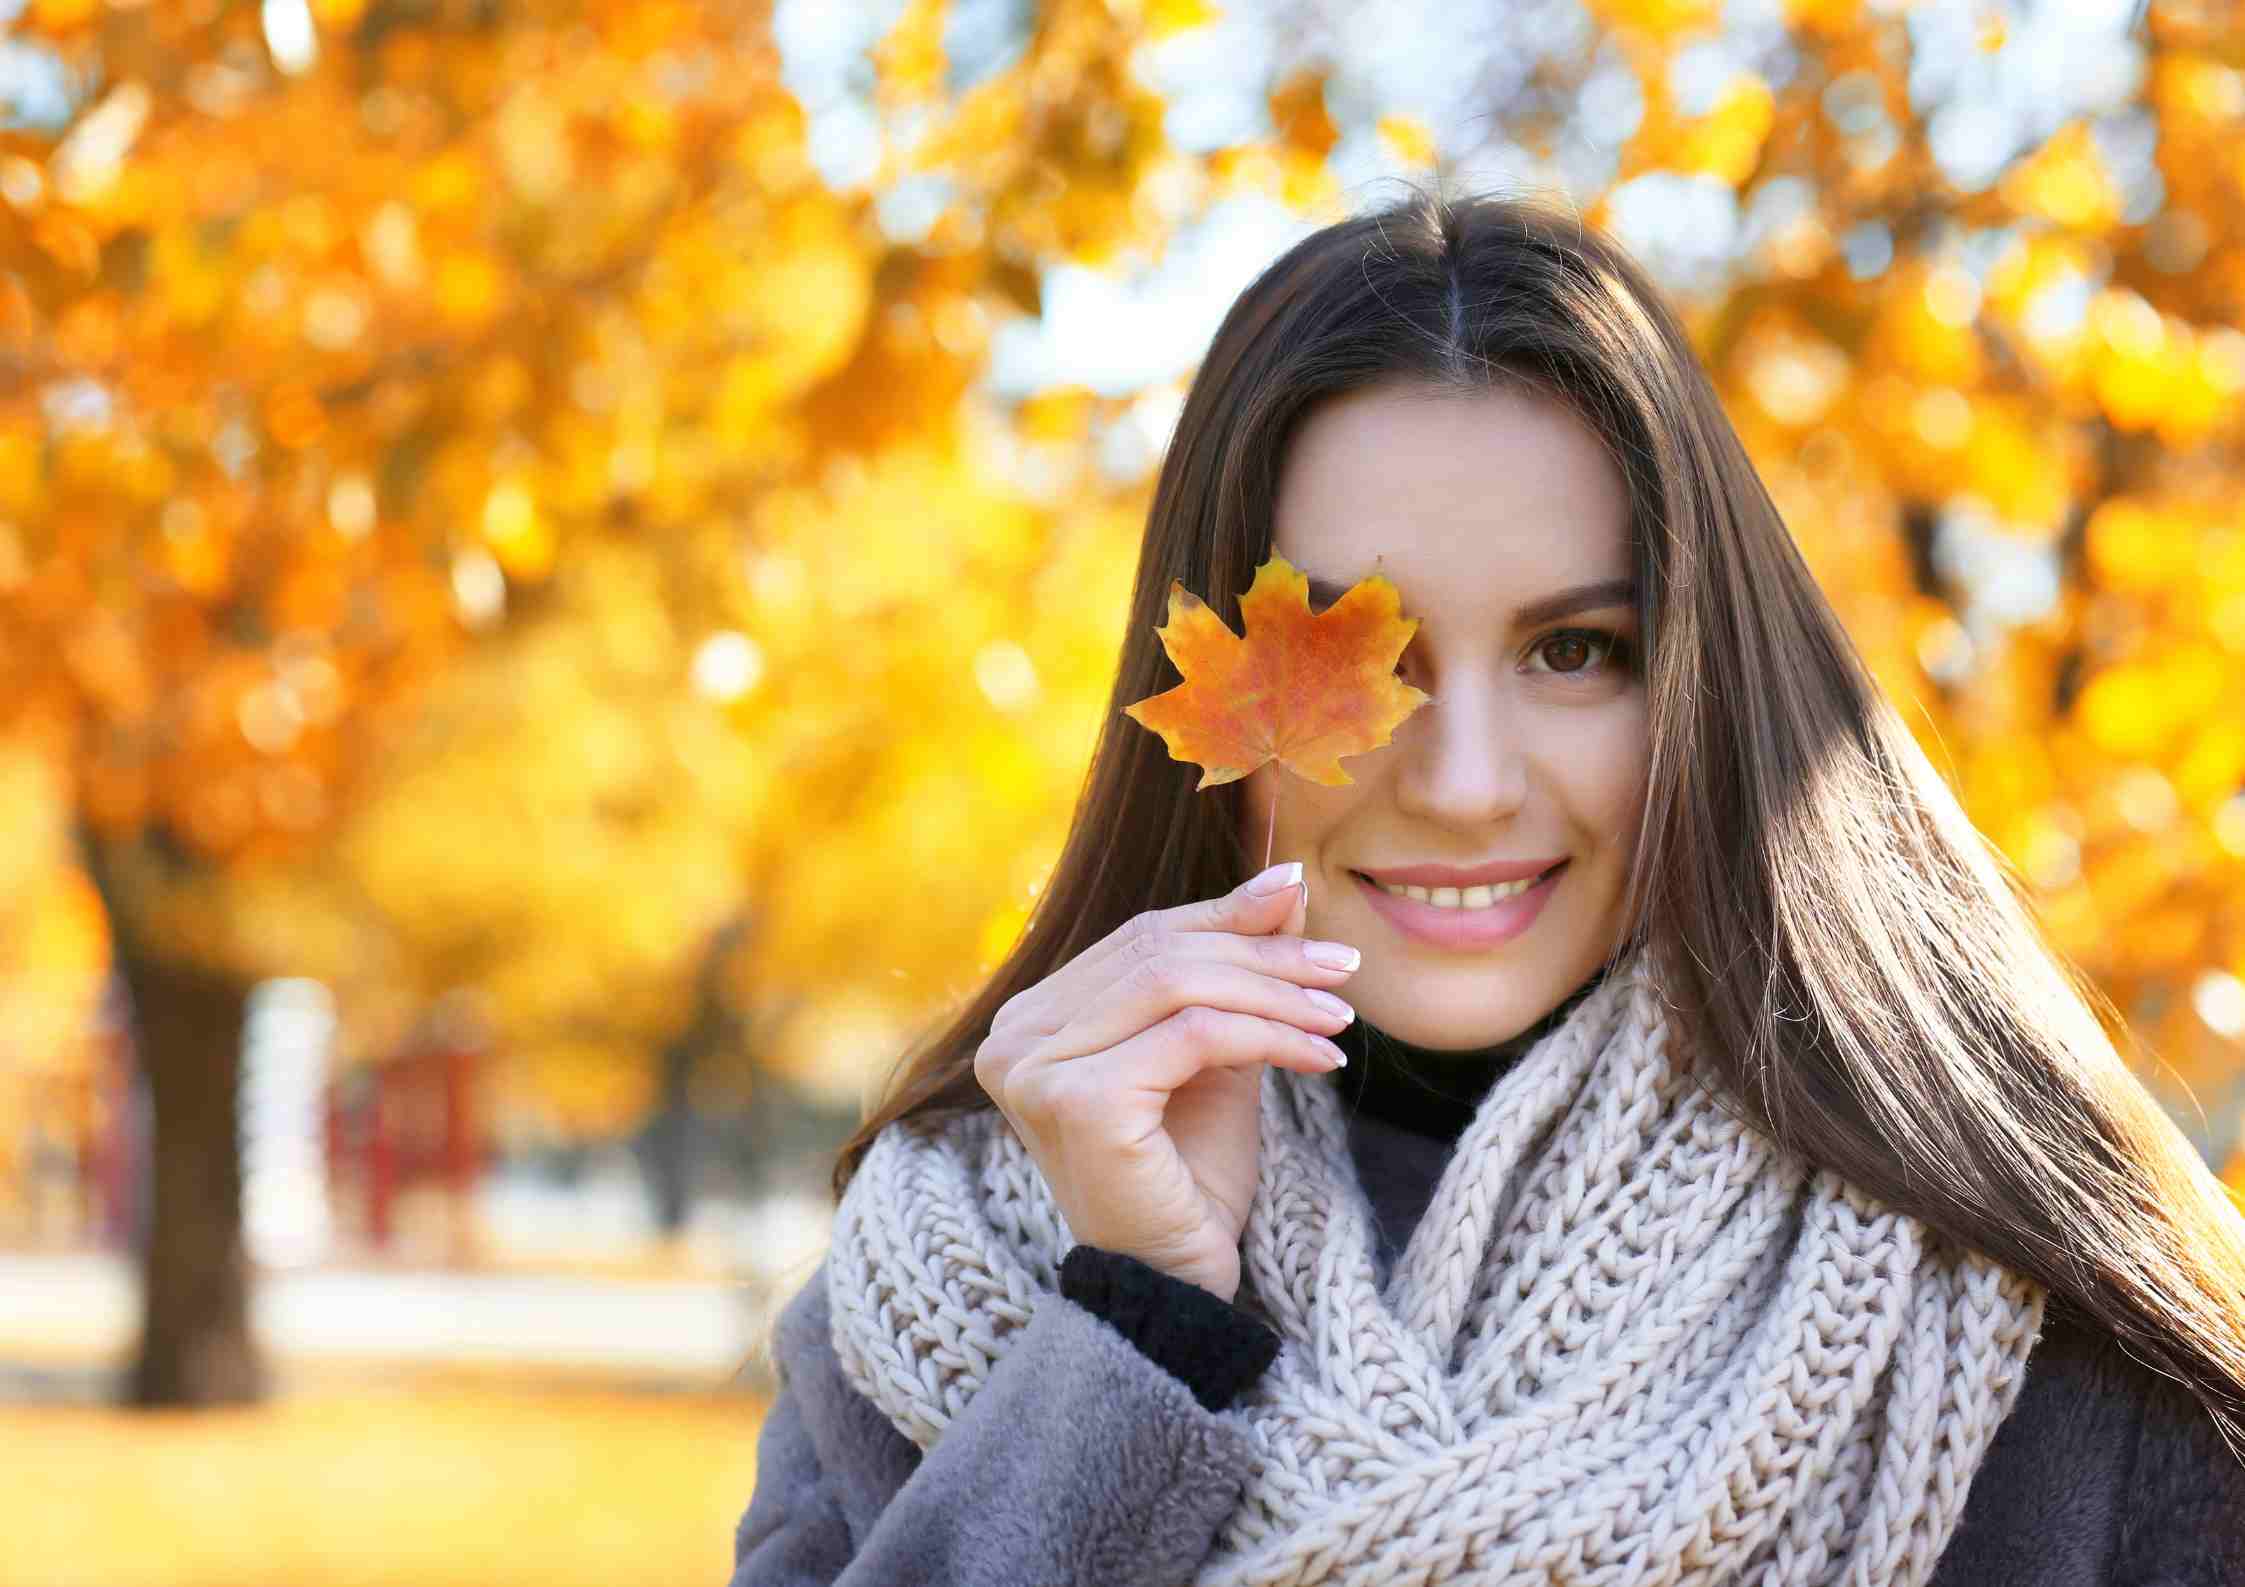 How Do You Prepare Your Skin for Fall?